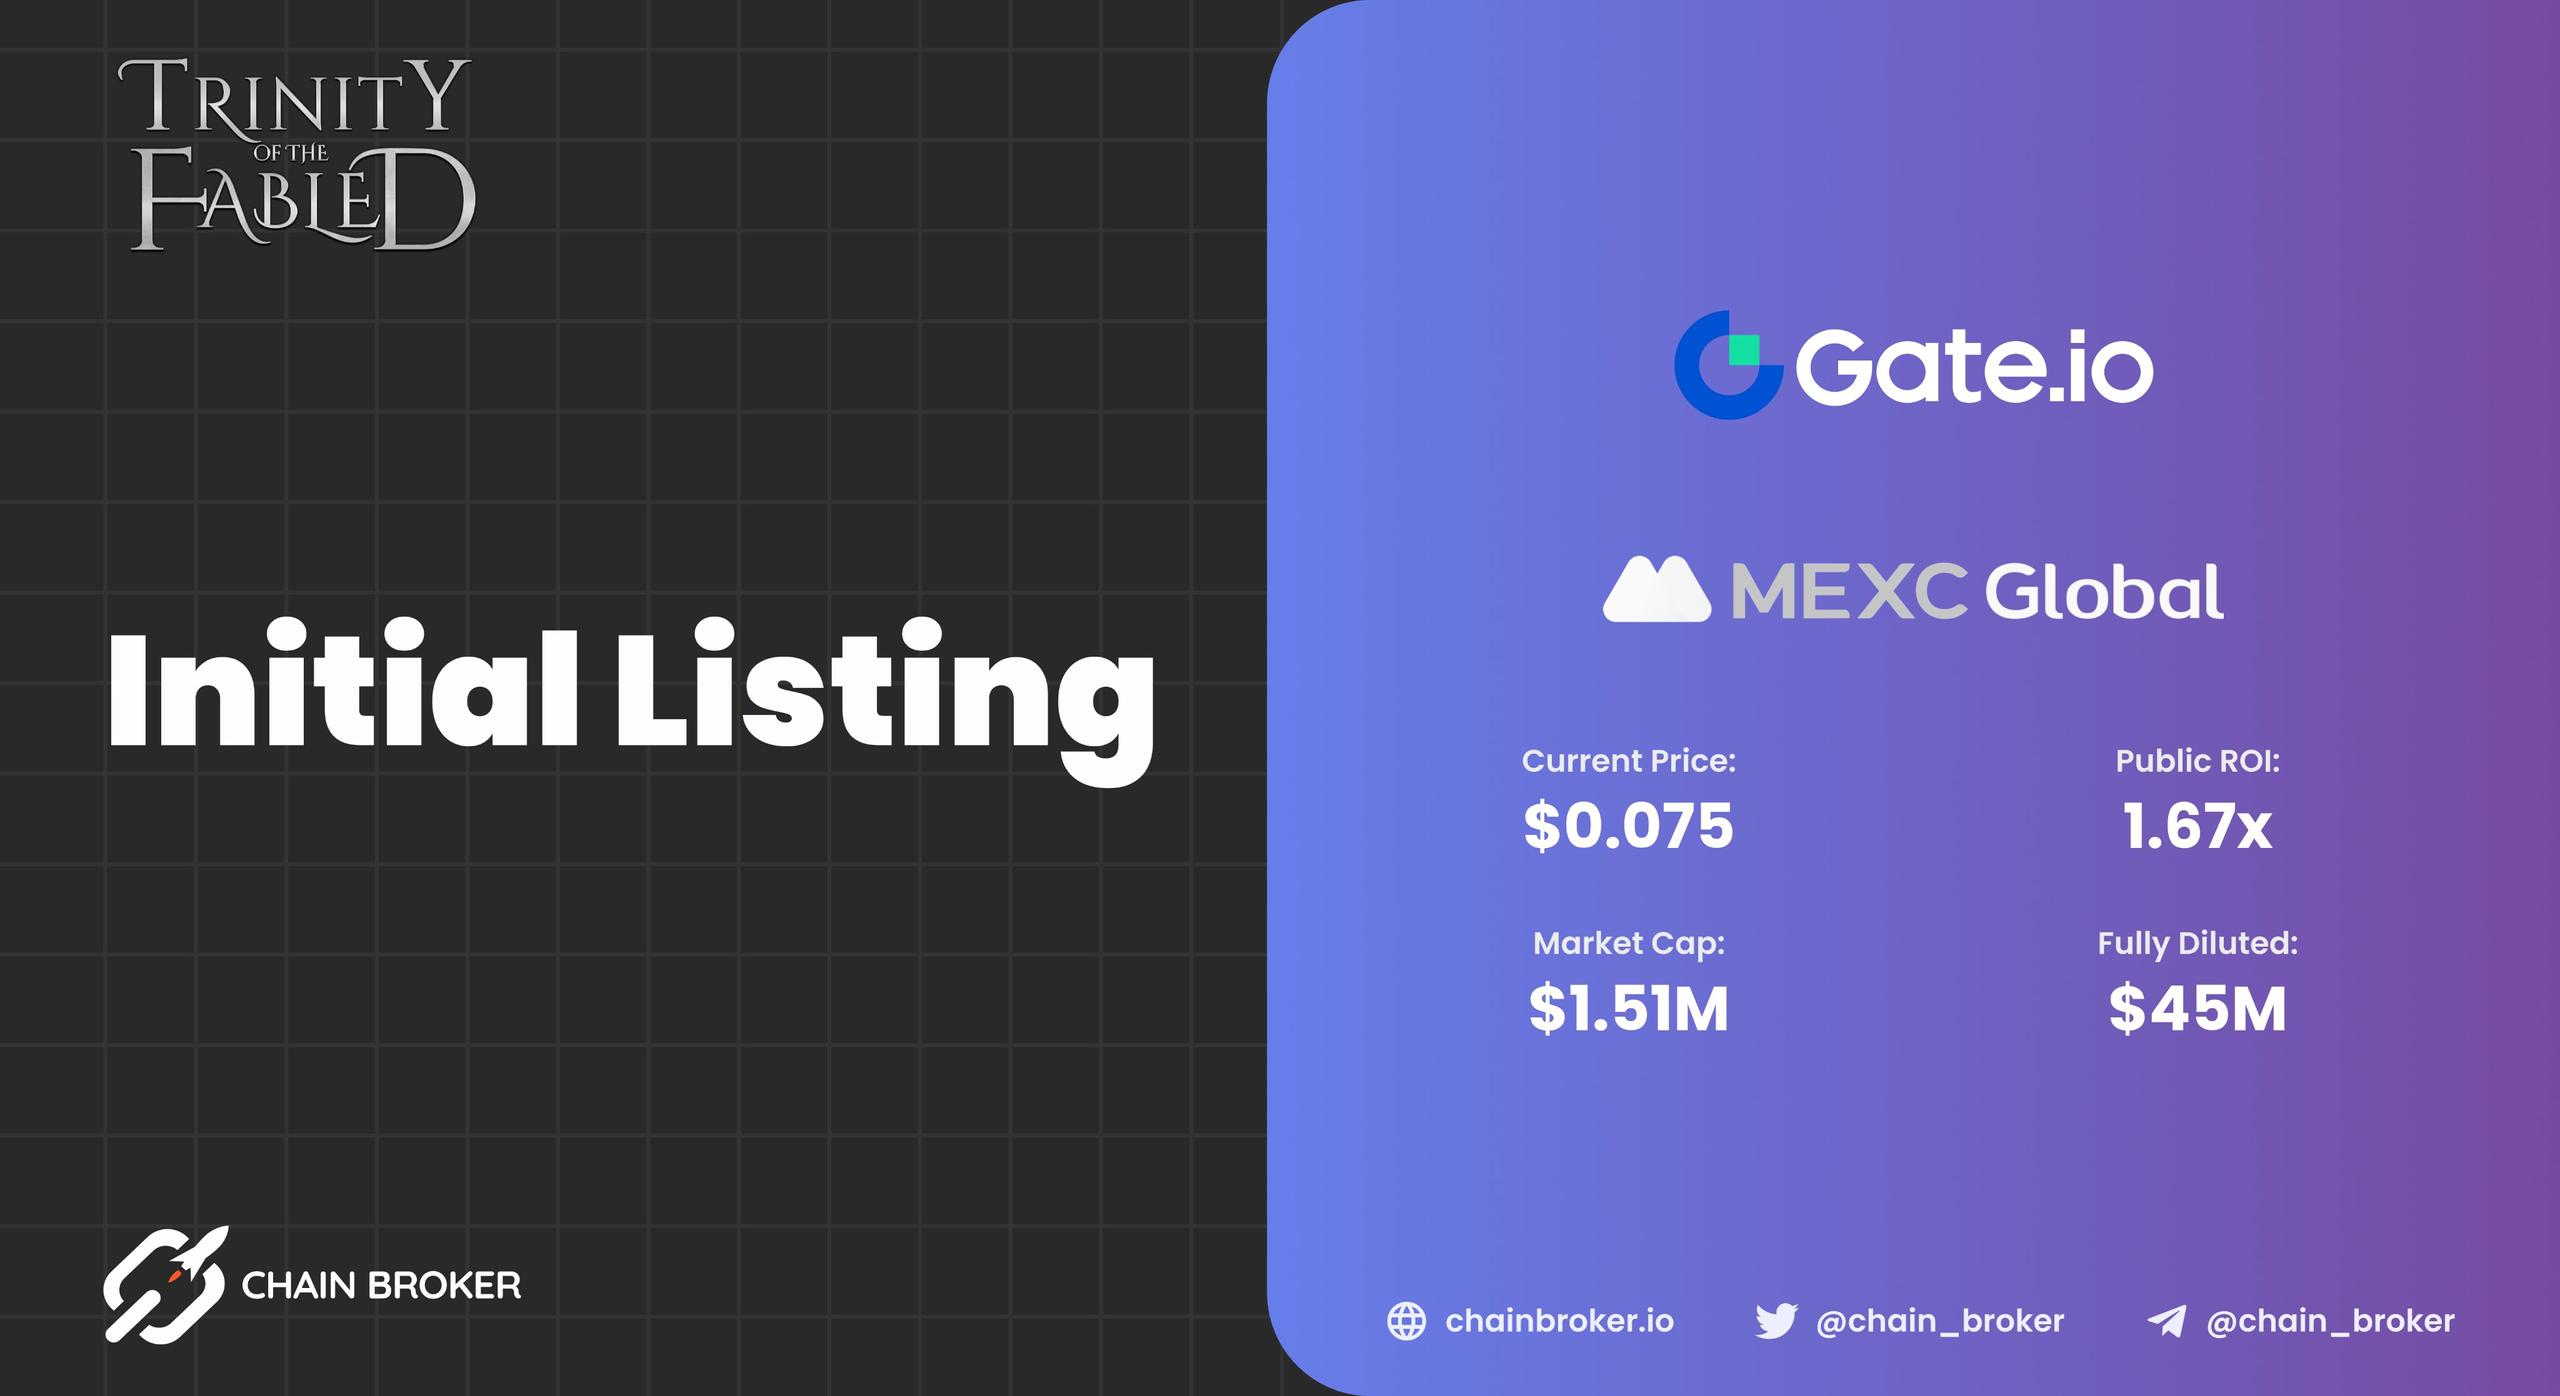 $ABYS has been Listed on MEXC and Gate.io